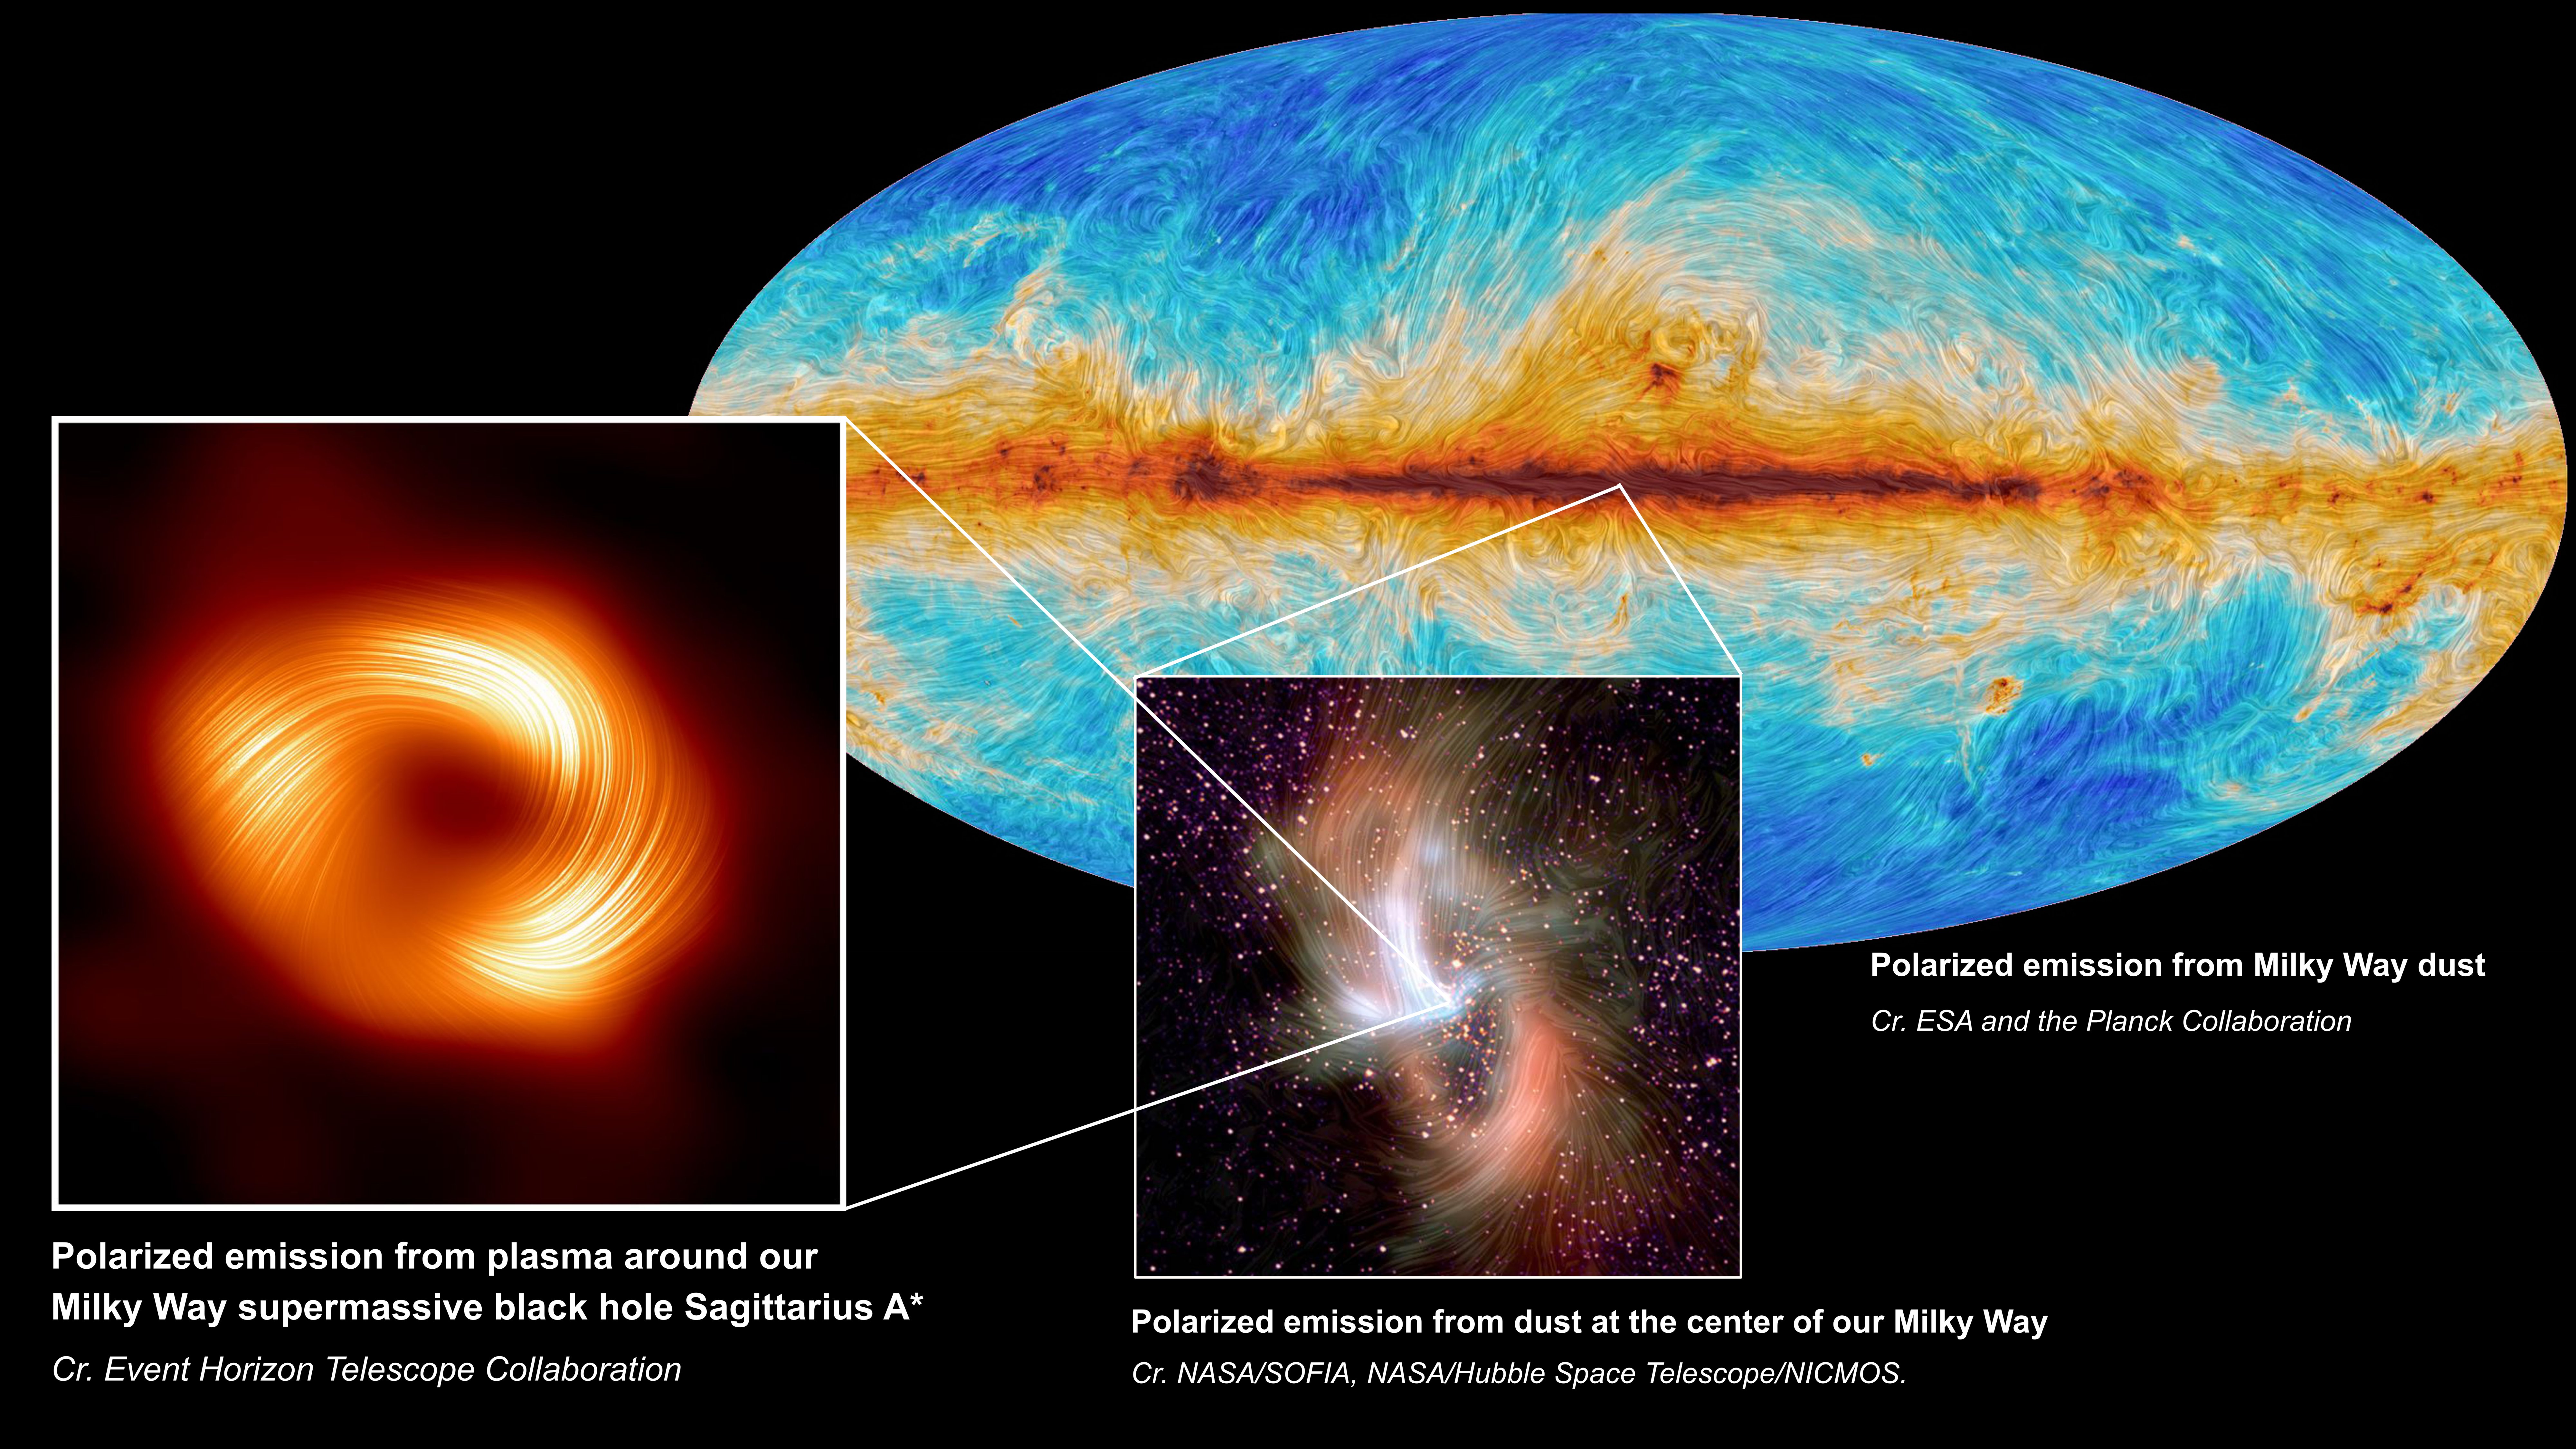 Handout: At left, the supermassive black hole at the center of the Milky Way Galaxy, Sagittarius A*, is seen in polarized light, the visible lines indicating the orientation of polarization, which is related to the magnetic field around the shadow of the black hole. At center, the polarized emission from the center of the Milky Way, as captured by SOFIA. At back right, the Planck Collaboration mapped polarized emission from dust across the Milky Way.